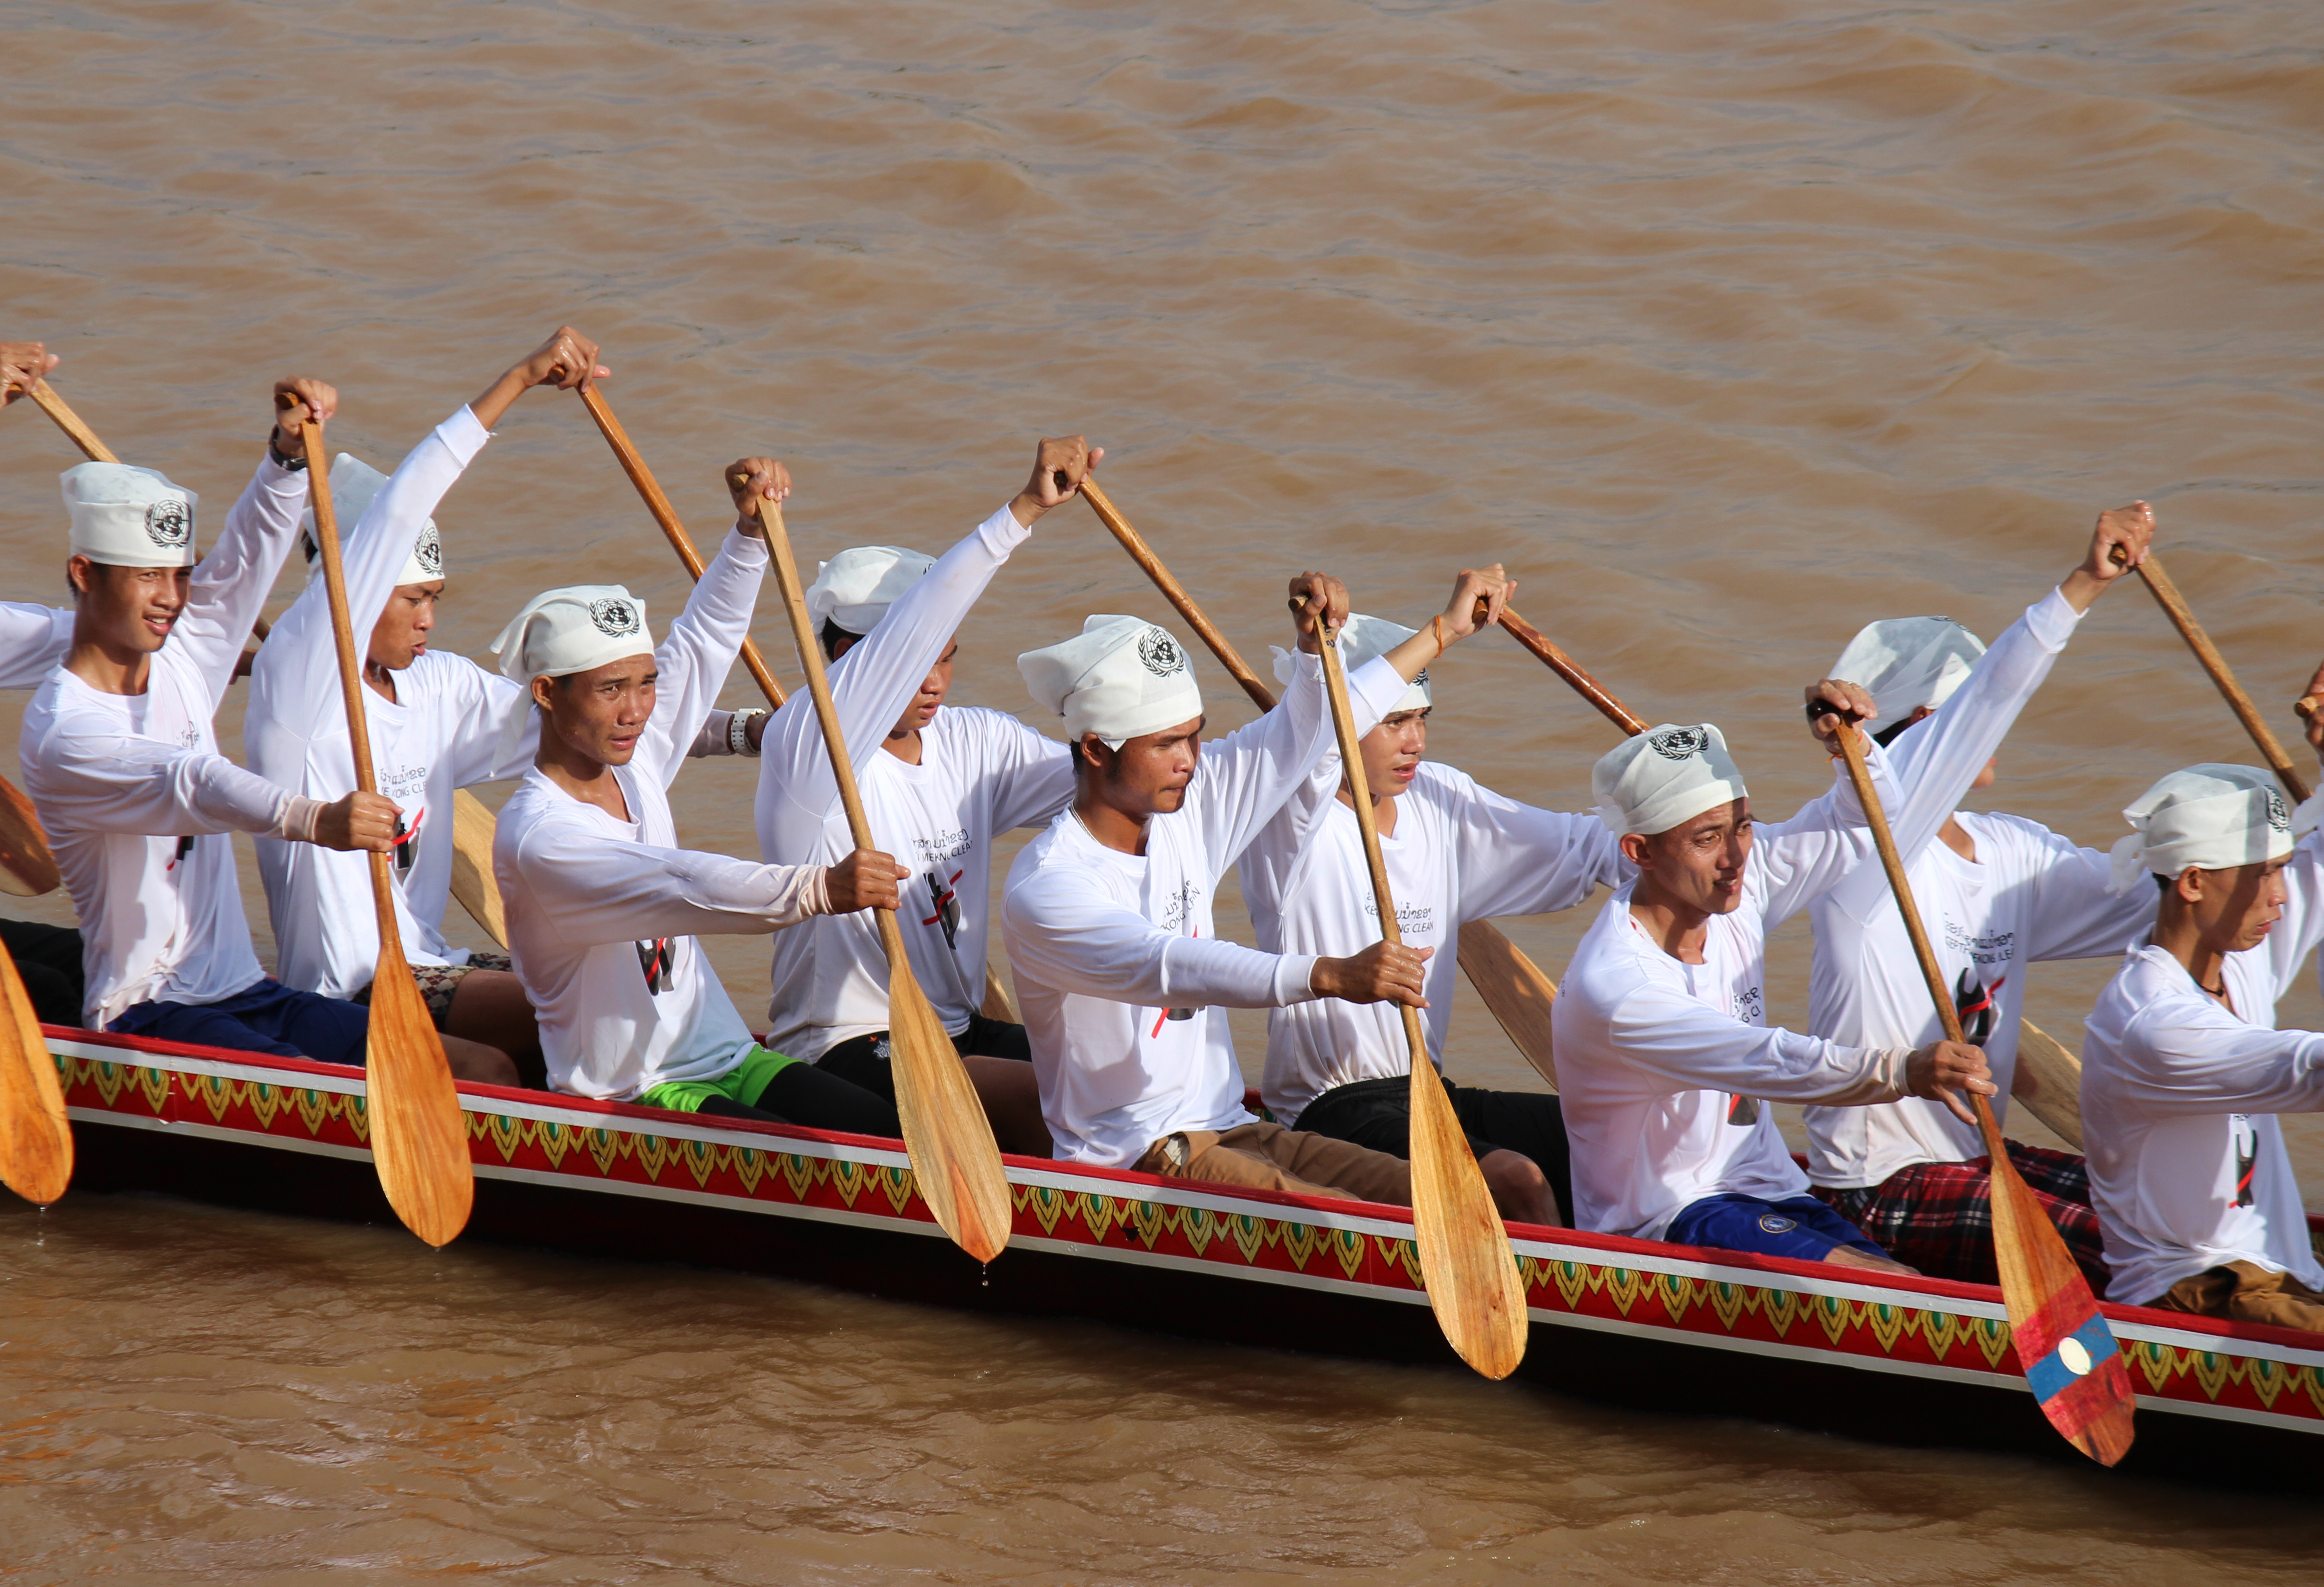 The UN-supported boat racing team in Lao PDR on a crusade against single-use plastics.